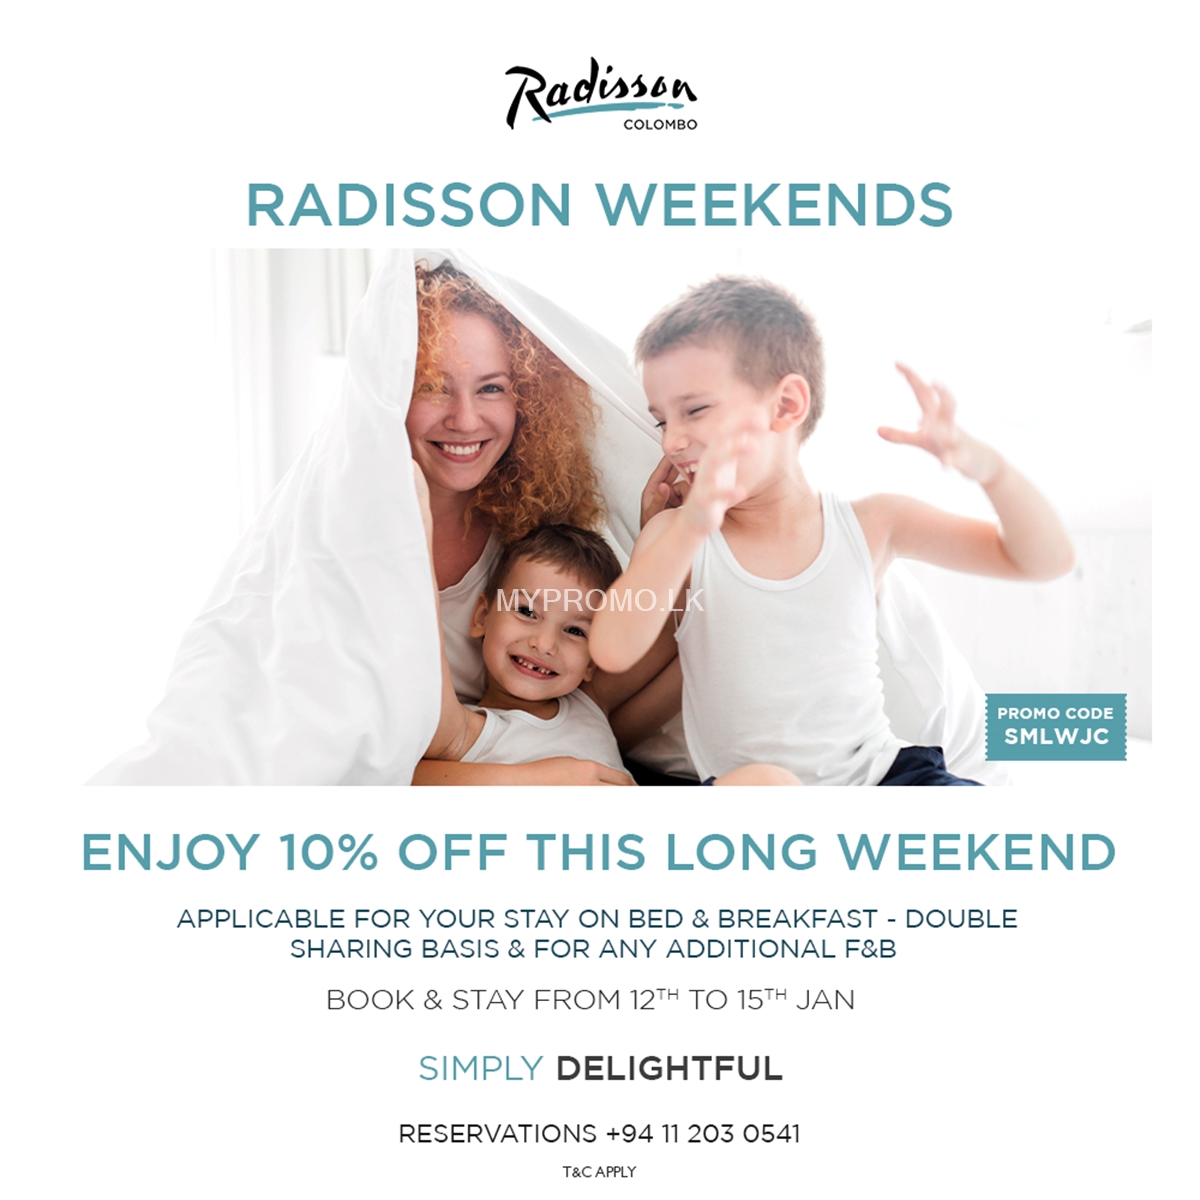 Enjoy 10% Off this Long Weekend at Radisson Hotel Colombo